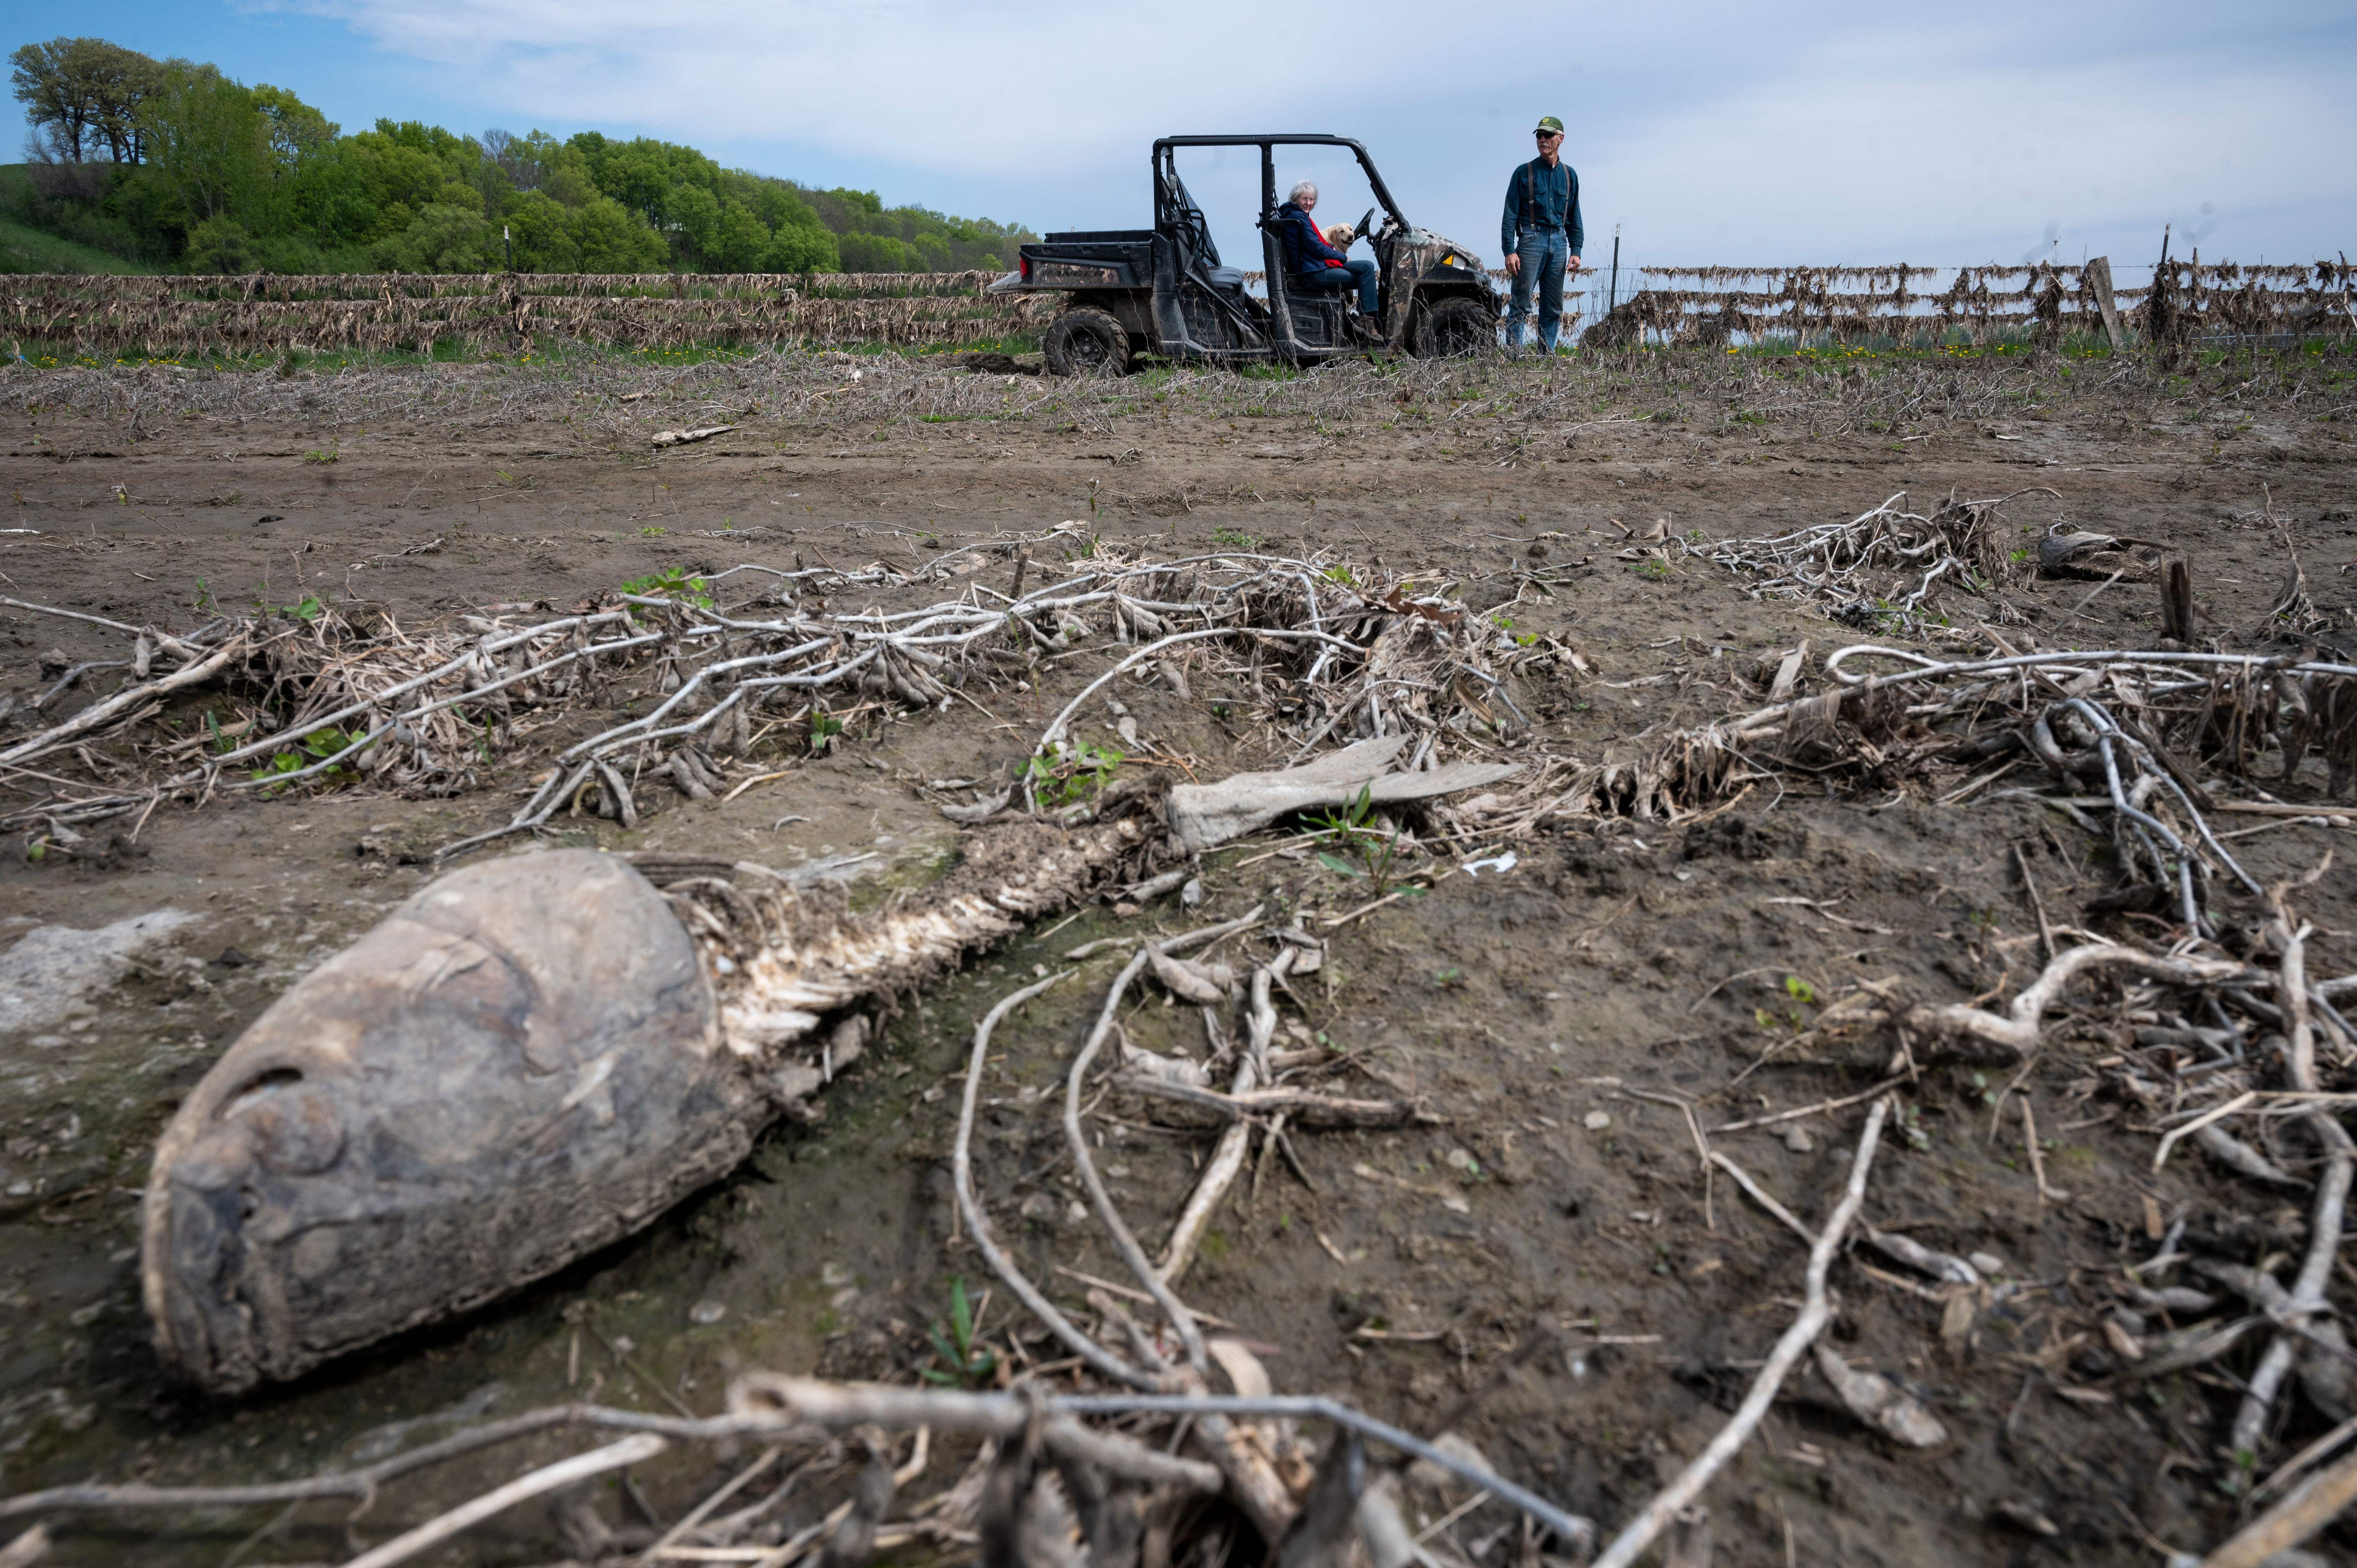 The bones of a fish washed ashore lie in a destroyed field next to the Missouri River in Nebraska, in May 2019. Photo: JOHANNES EISELE/AFP via Getty Images